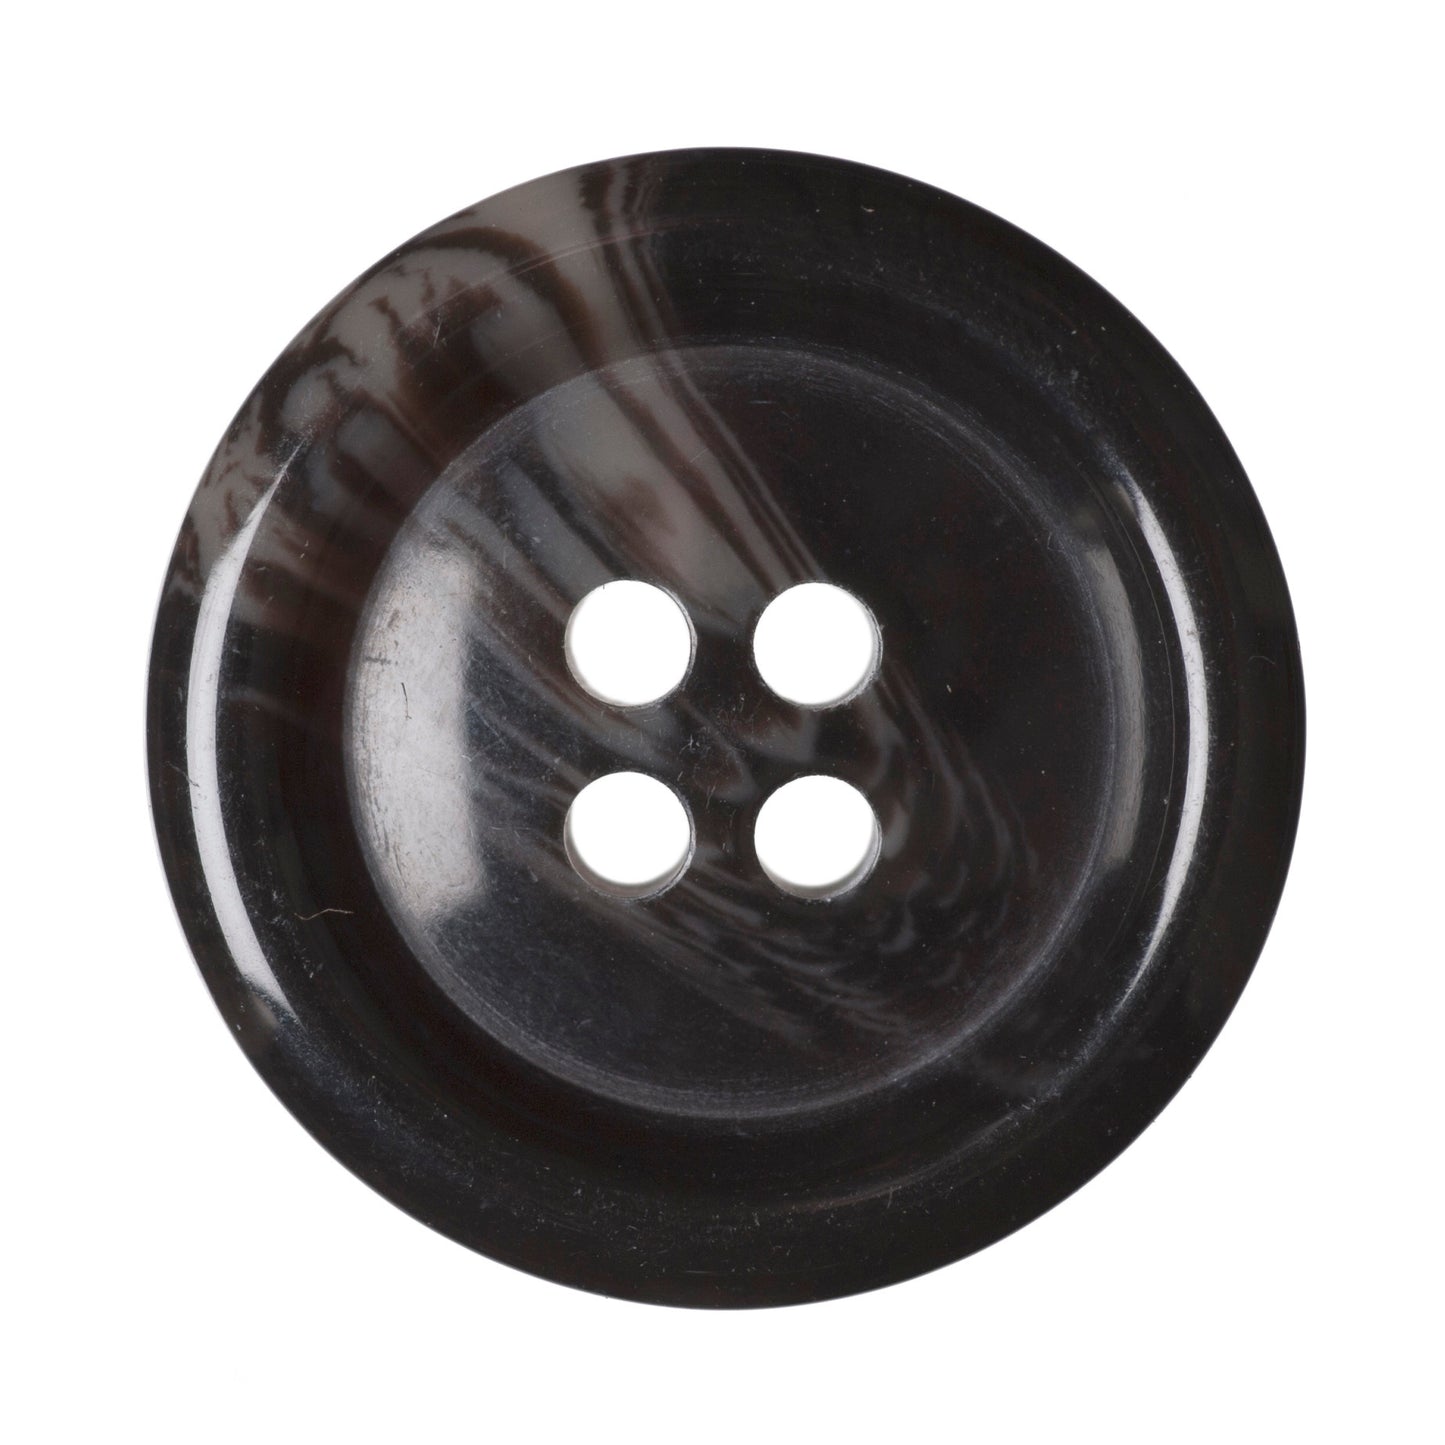 4 Hole Variegated Jacket Button - 23mm - Brown [LB15.3]